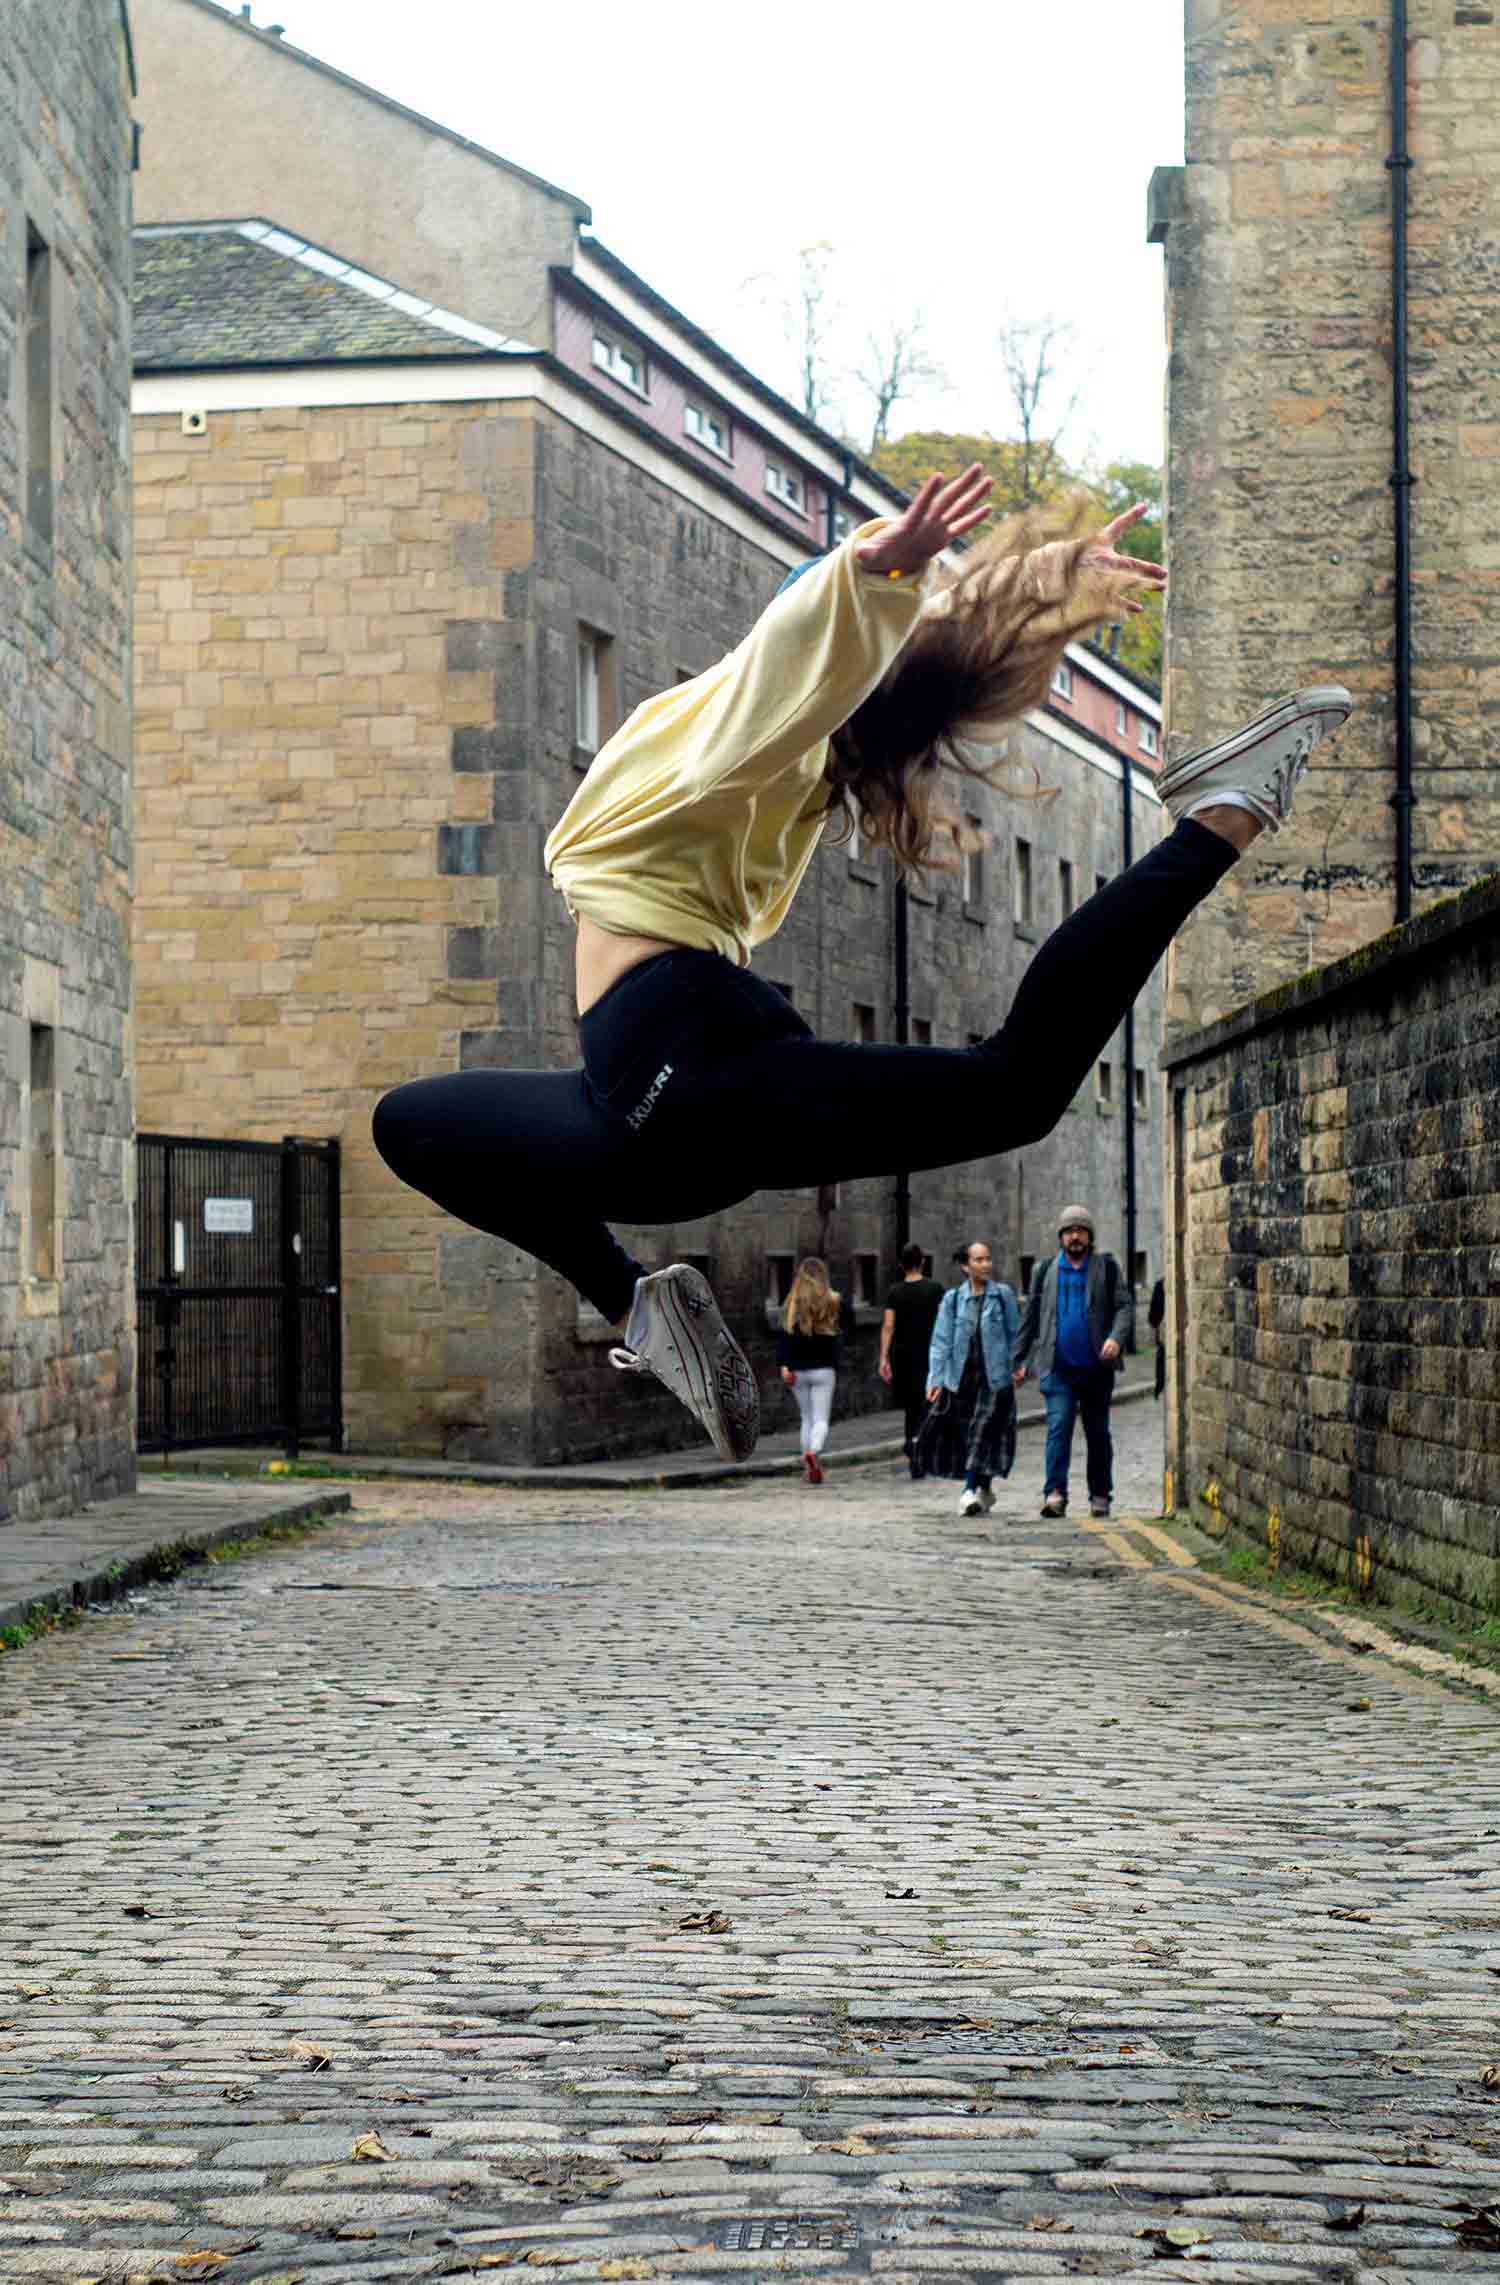 A gymnast jumping in a side street